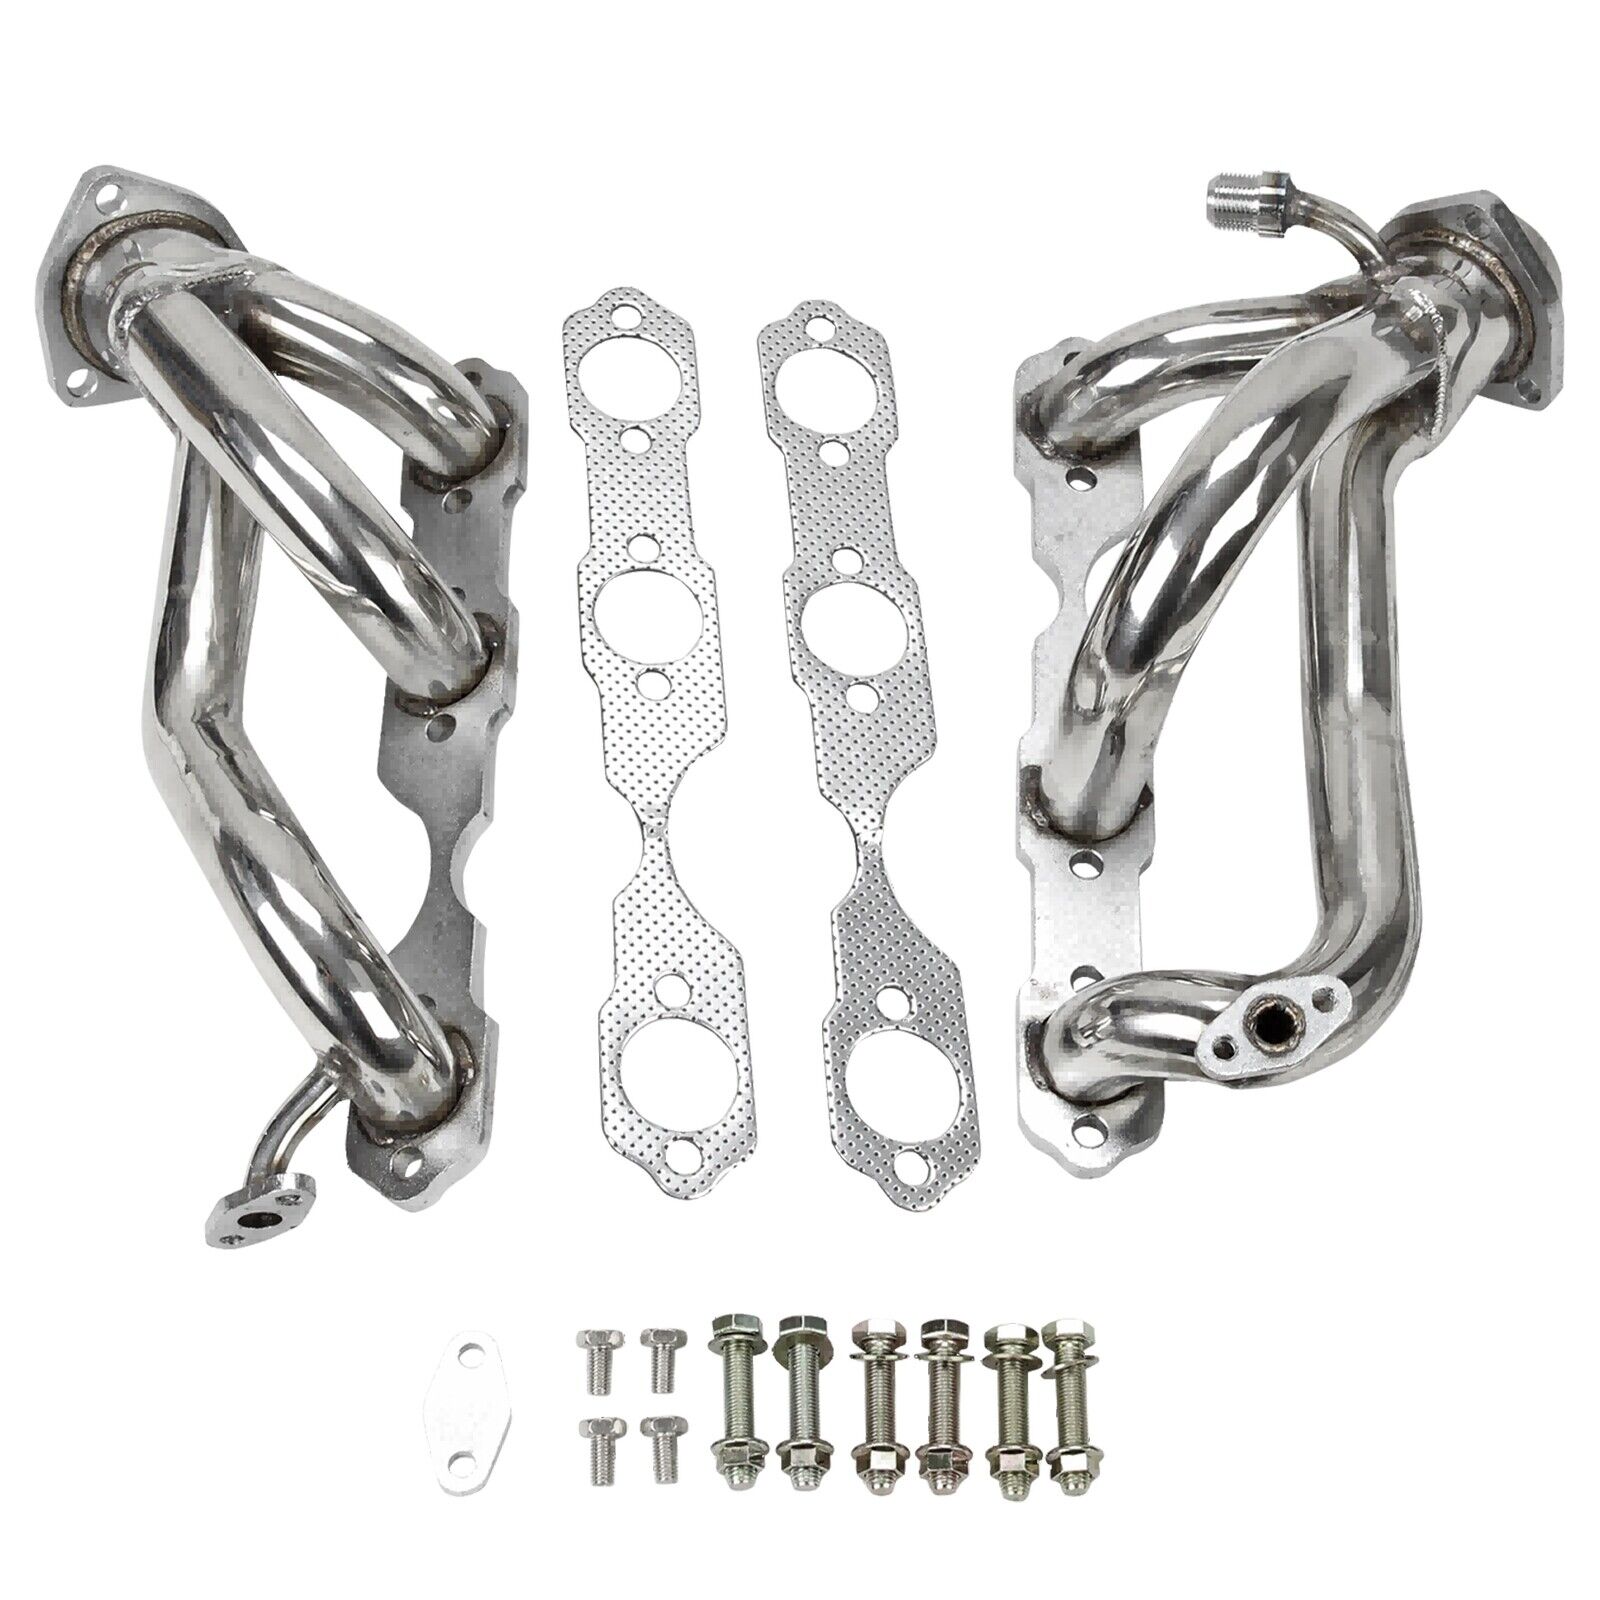 For 1996-2001 Chevy S10 Blazer Sonoma 4.3L V6 4WD Exhaust Headers Manifold